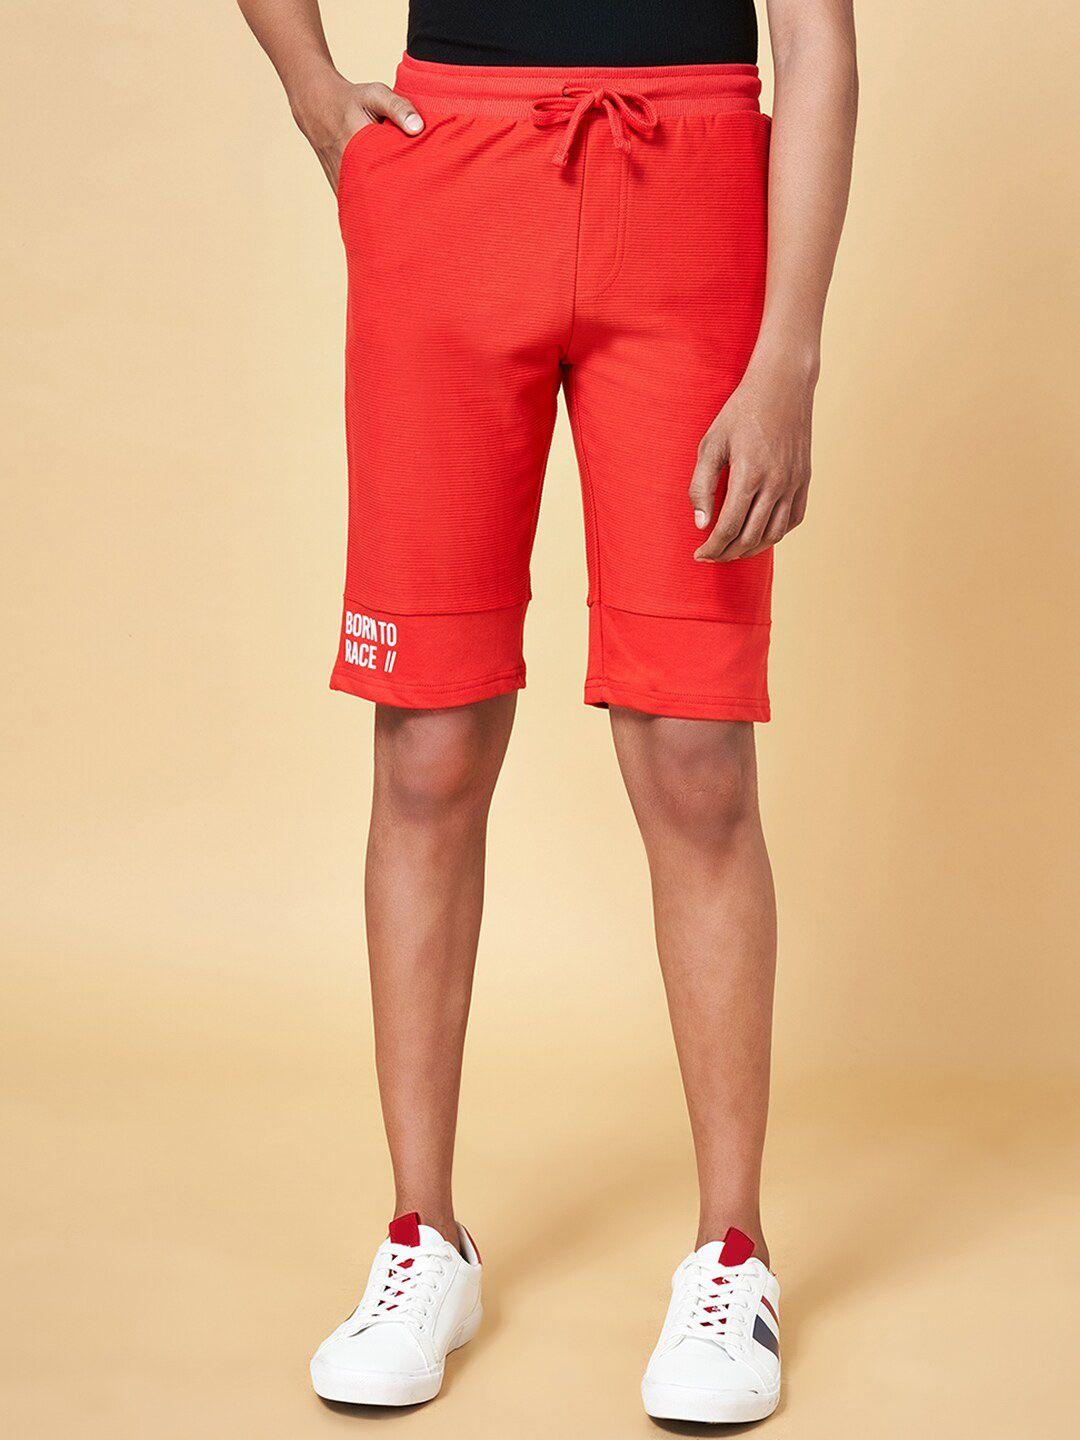 coolsters by pantaloons boys red sports shorts